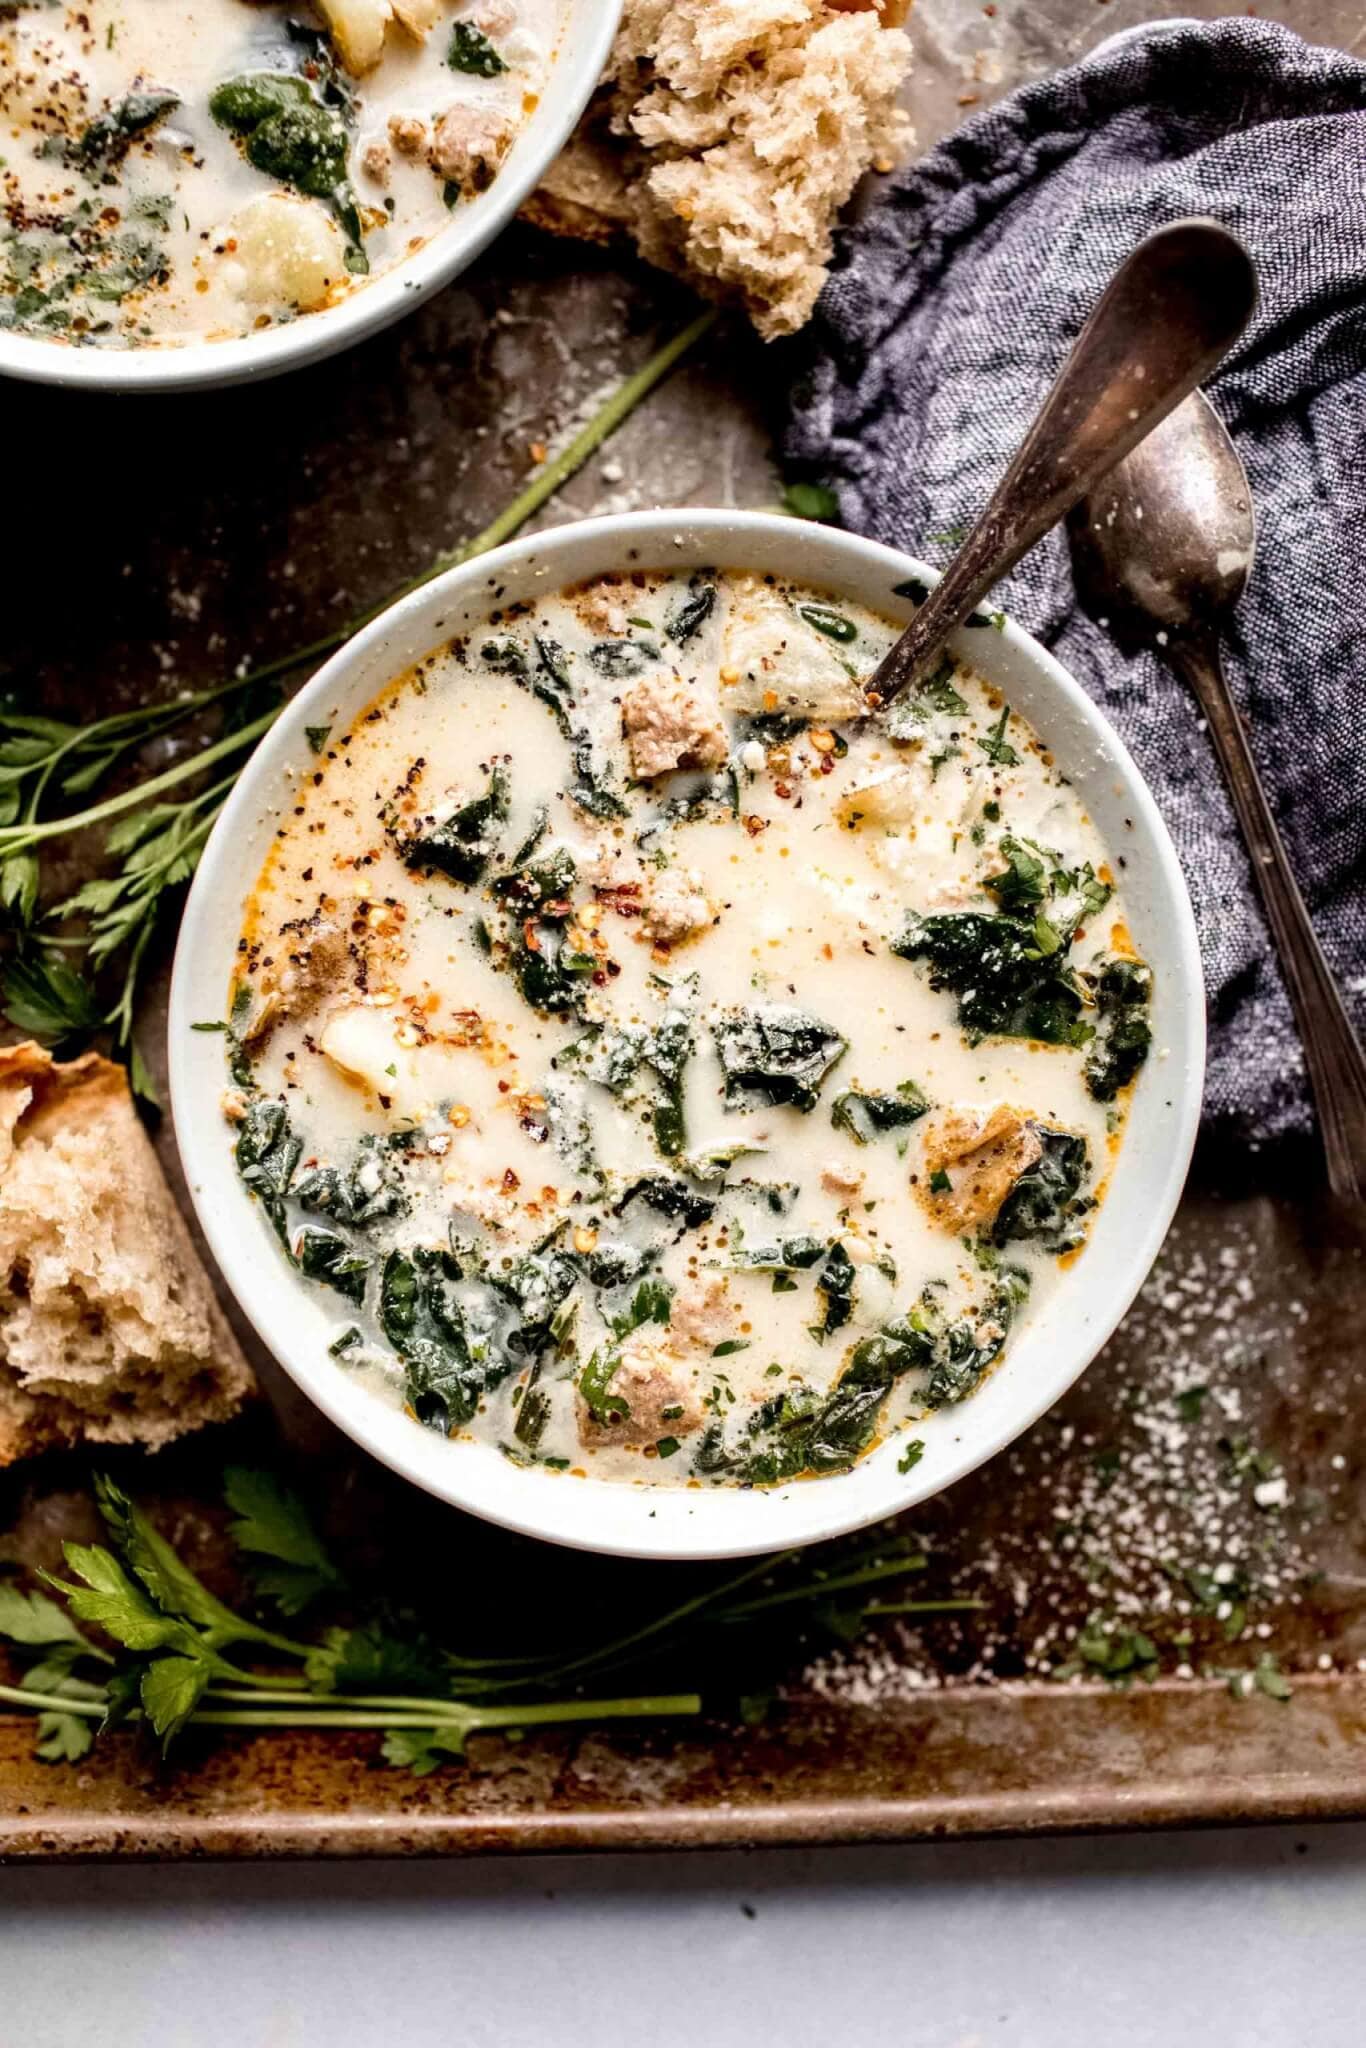 Two bowls of zuppa toscana on serving tray next to pieces of crusty bread.